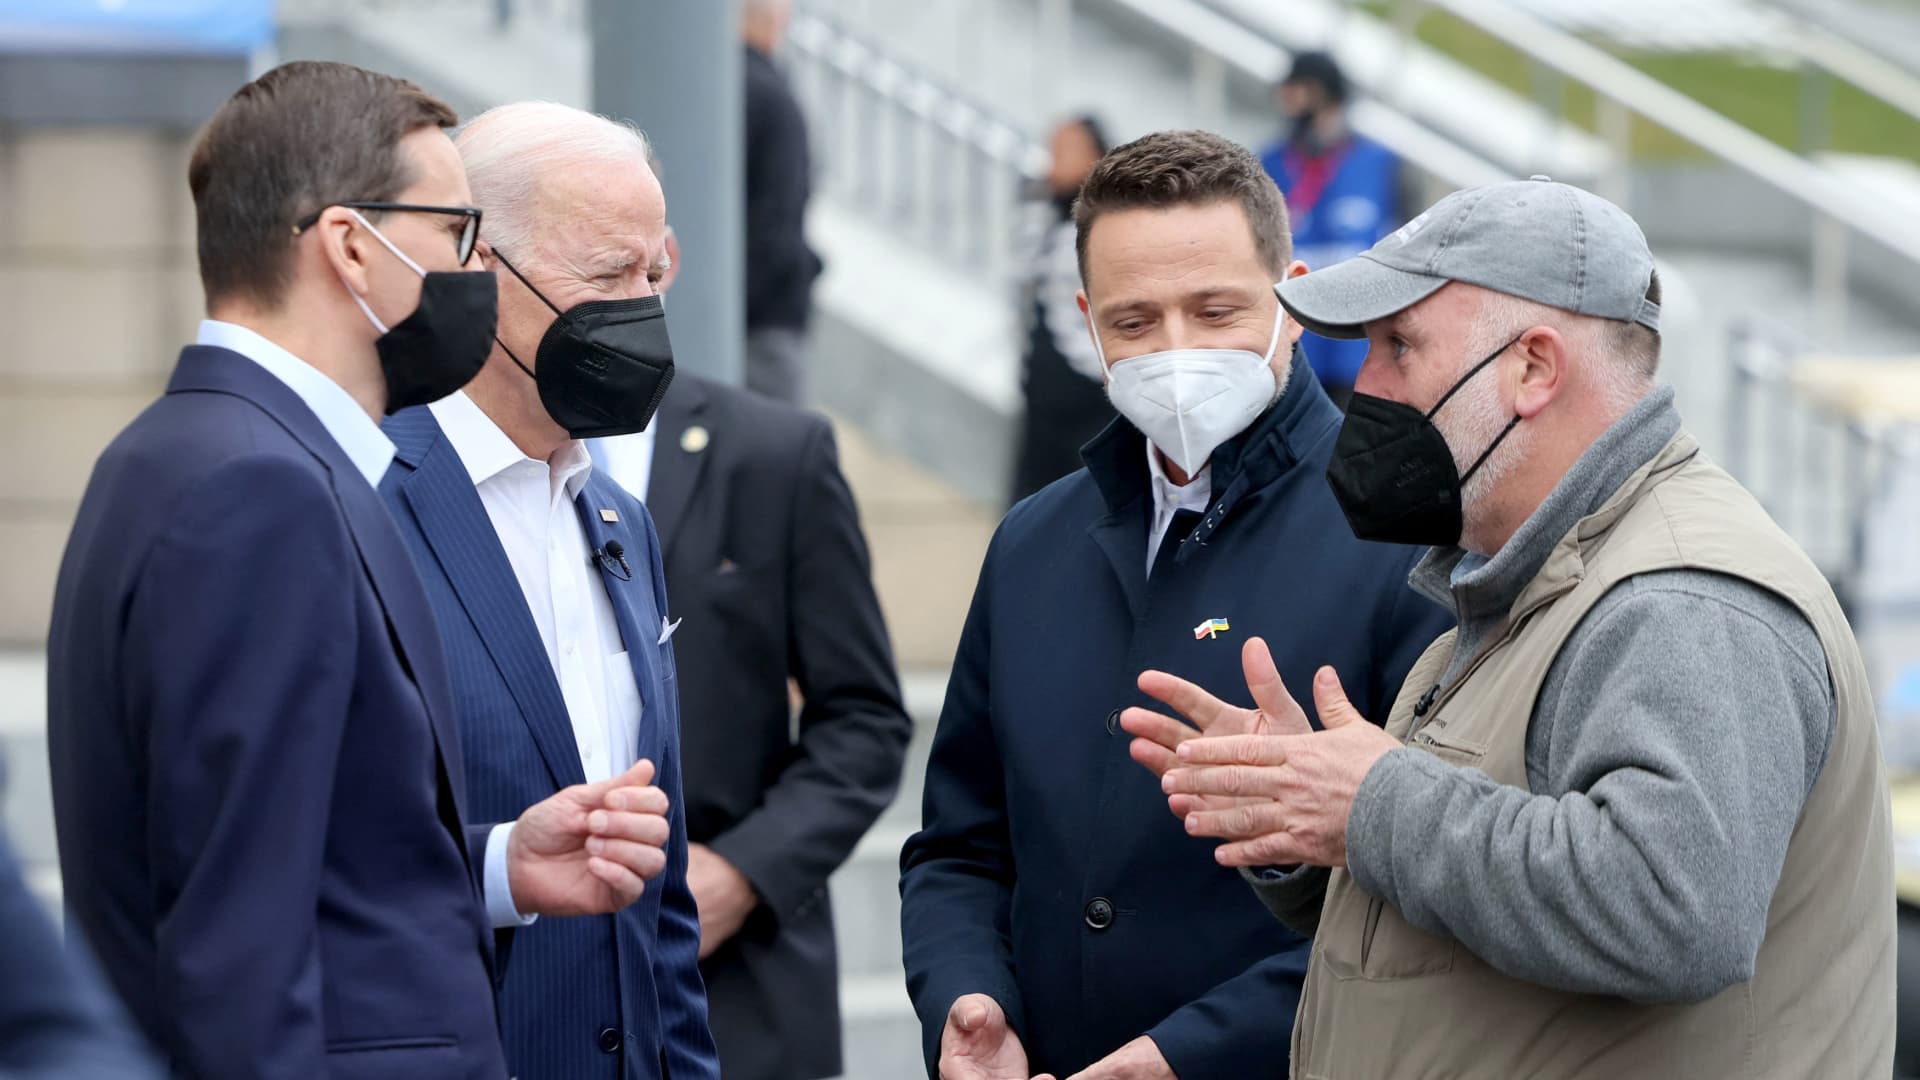 U.S. President Joe Biden, flanked by Mayor of Warsaw Rafal Trzaskowski and Polish Prime Minister Mateusz Morawiecki, speaks with chef Jose Andres from World Central Kitchen as he visits Ukrainian refugees at the PGE National Stadium, in Warsaw, Poland March 26, 2022. 